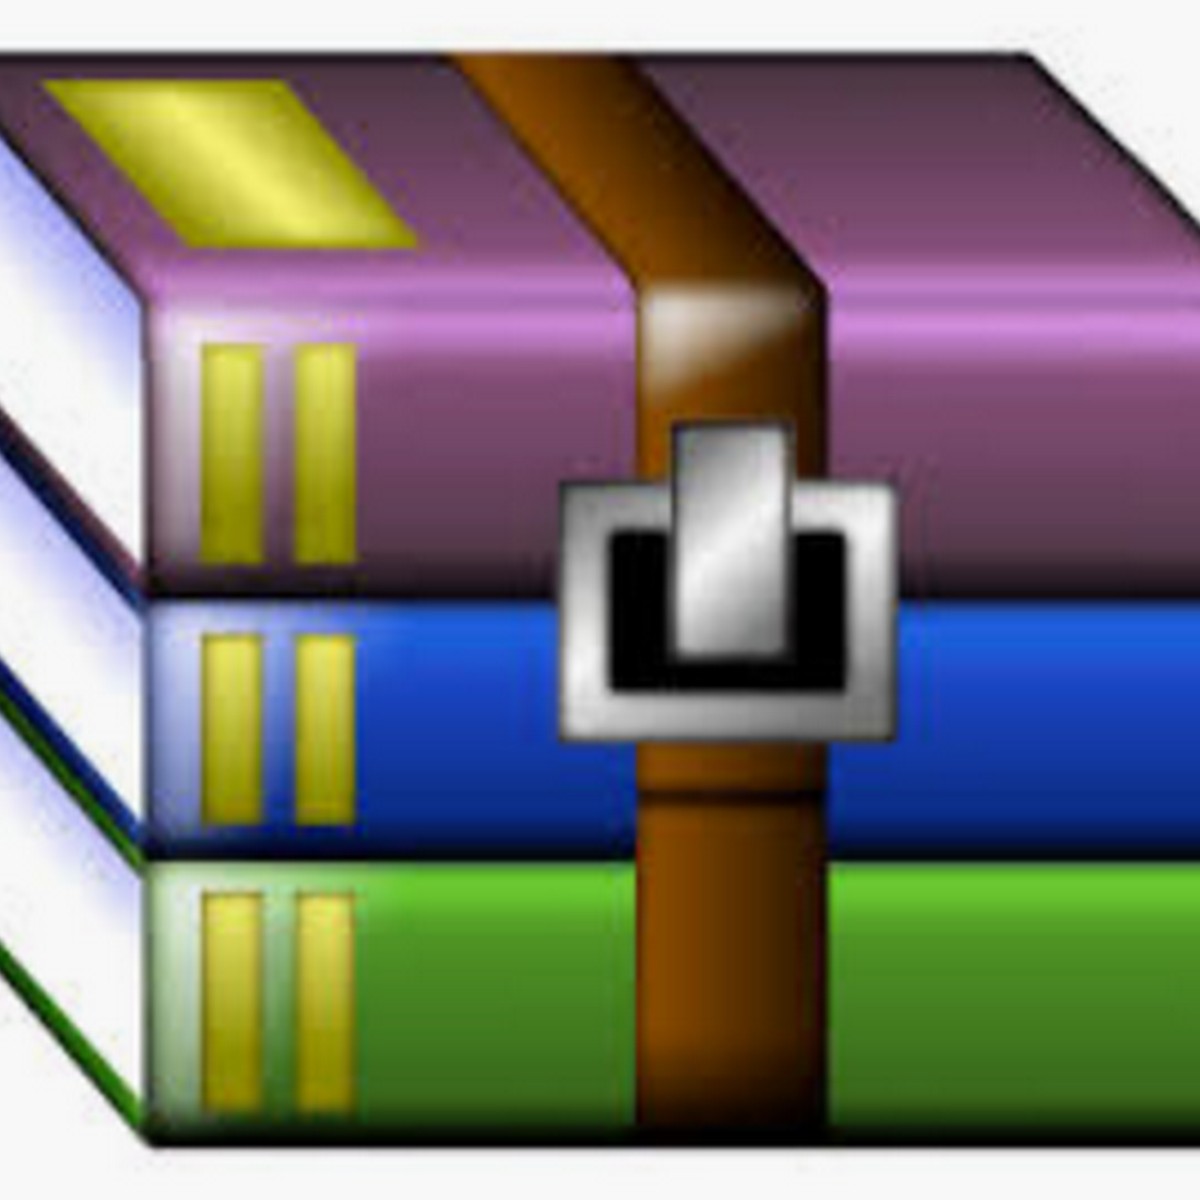 winrar for mac 10.6.8 free download